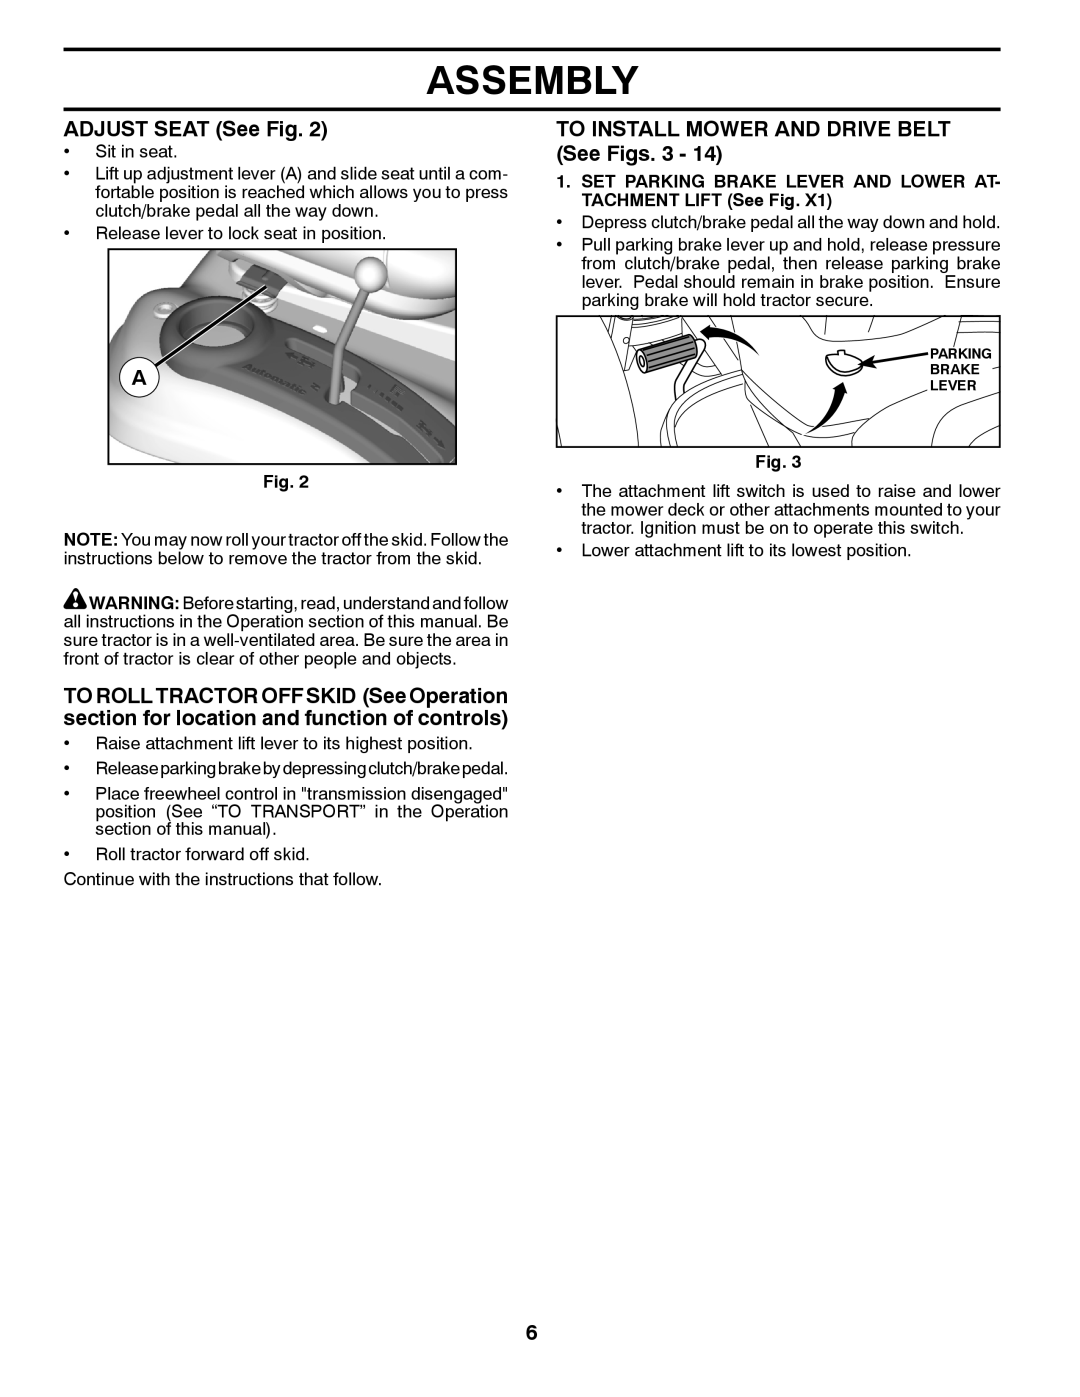 Husqvarna 96045002800, 532 44 00-55 owner manual ADJUST SEAT See Fig, TO INSTALL MOWER AND DRIVE BELT See Figs, Assembly 